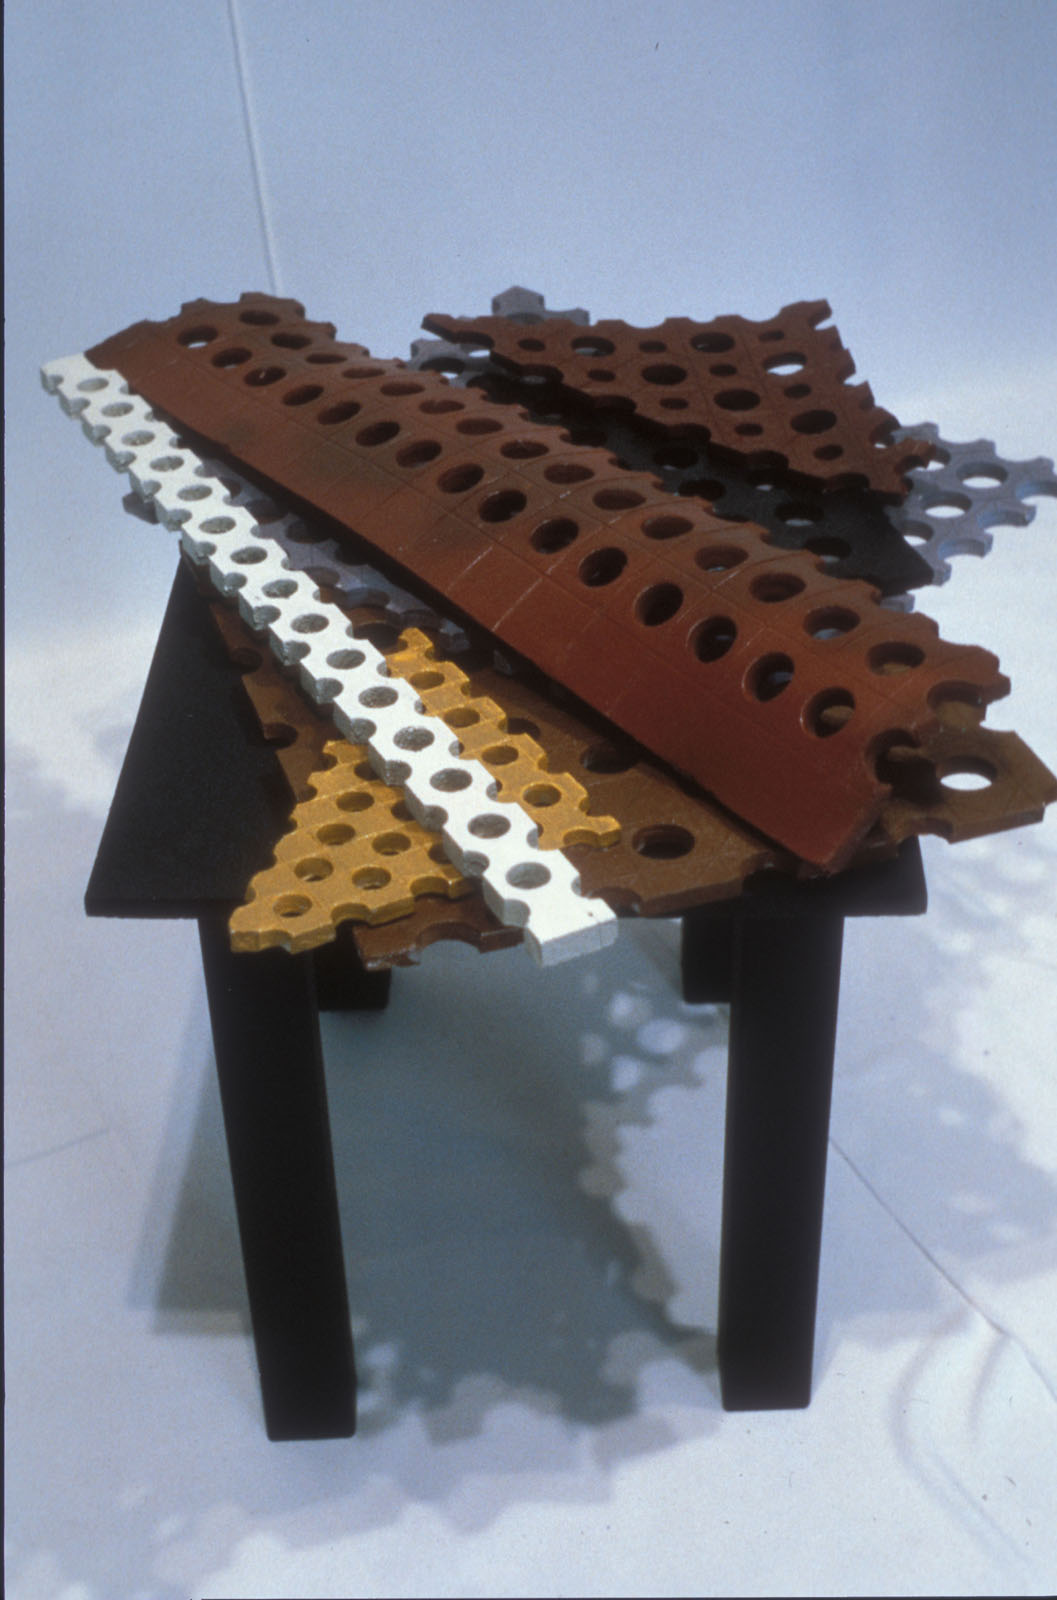 3D sculpture of deconstructed piano by Ray Katz